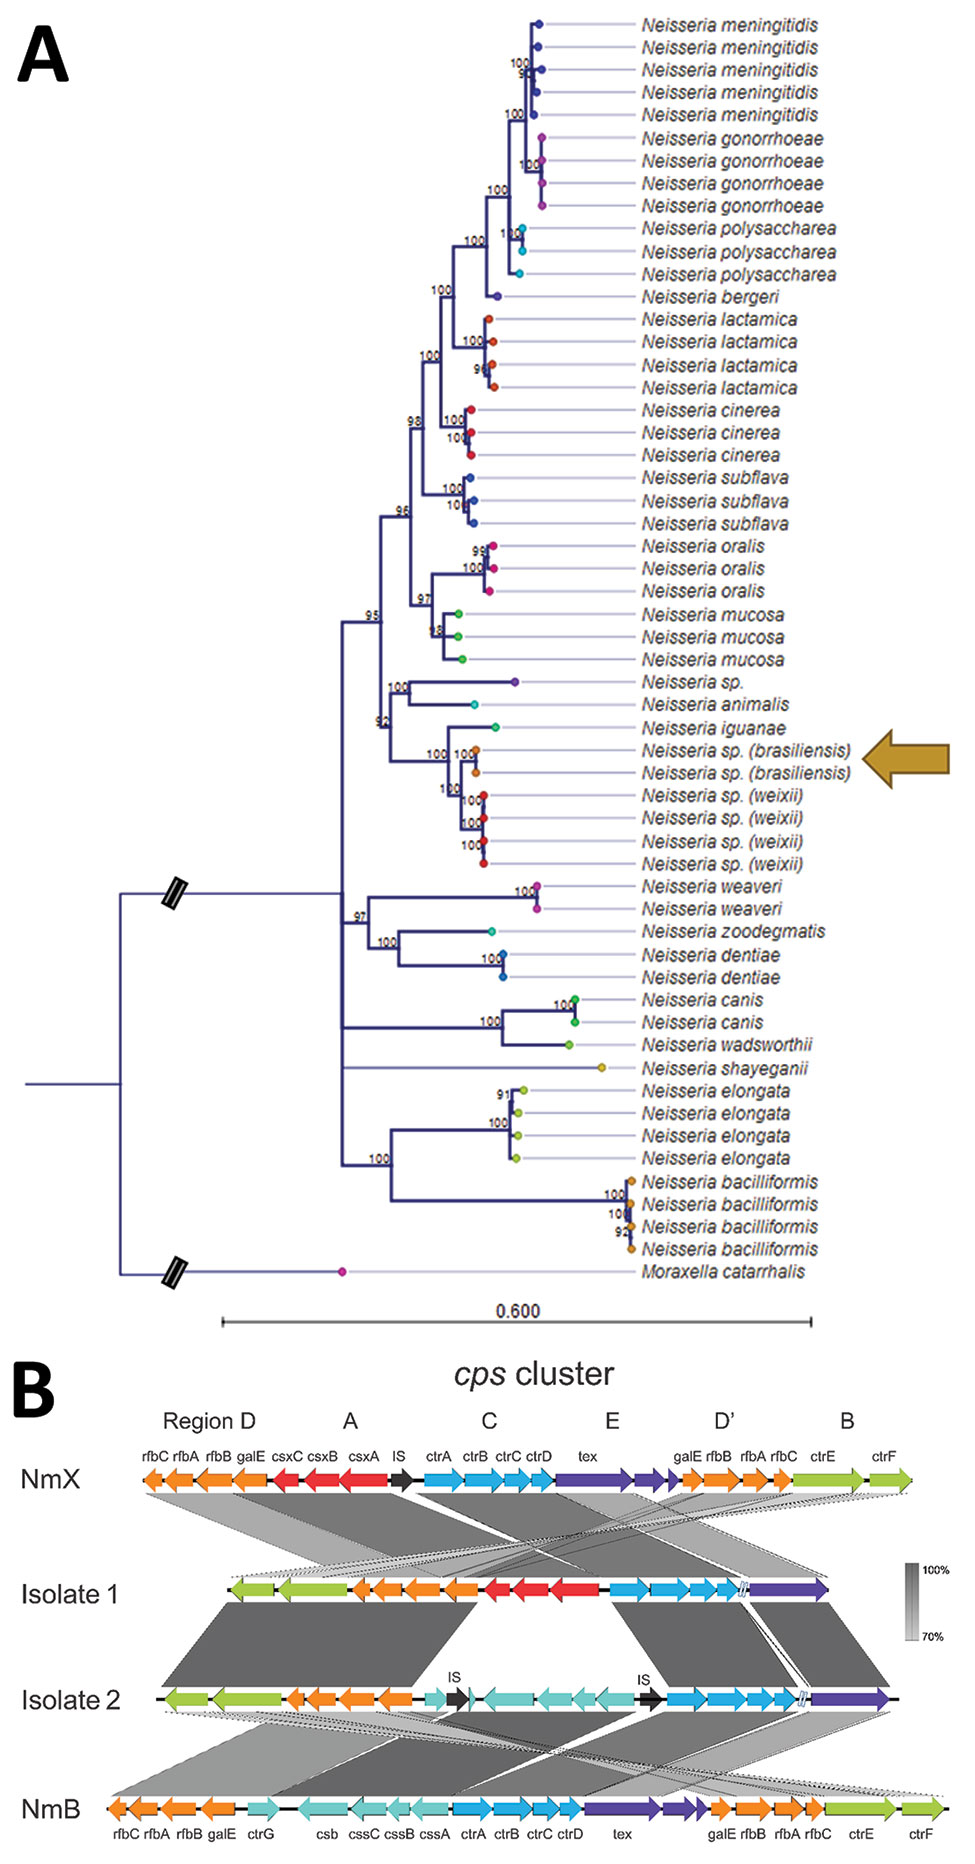 Analyses of newly characterized Neisseria species, Brazil. A) Maximum-likelihood phylogenetic tree of 53 aligned ribosomal multilocus sequence typing genes with 1,000 bootstrap replicates using Moraxella catarrhalis as an outgroup. Bootstrap support values &lt;90% are not shown. Scale bar represents number of substitutions per site. B) cps sequences in isolates 1 (N.95-16) and 2 (N.177-16) relative to meningococcal reference genomes. Arrows represent genes, which are color coded by previously de